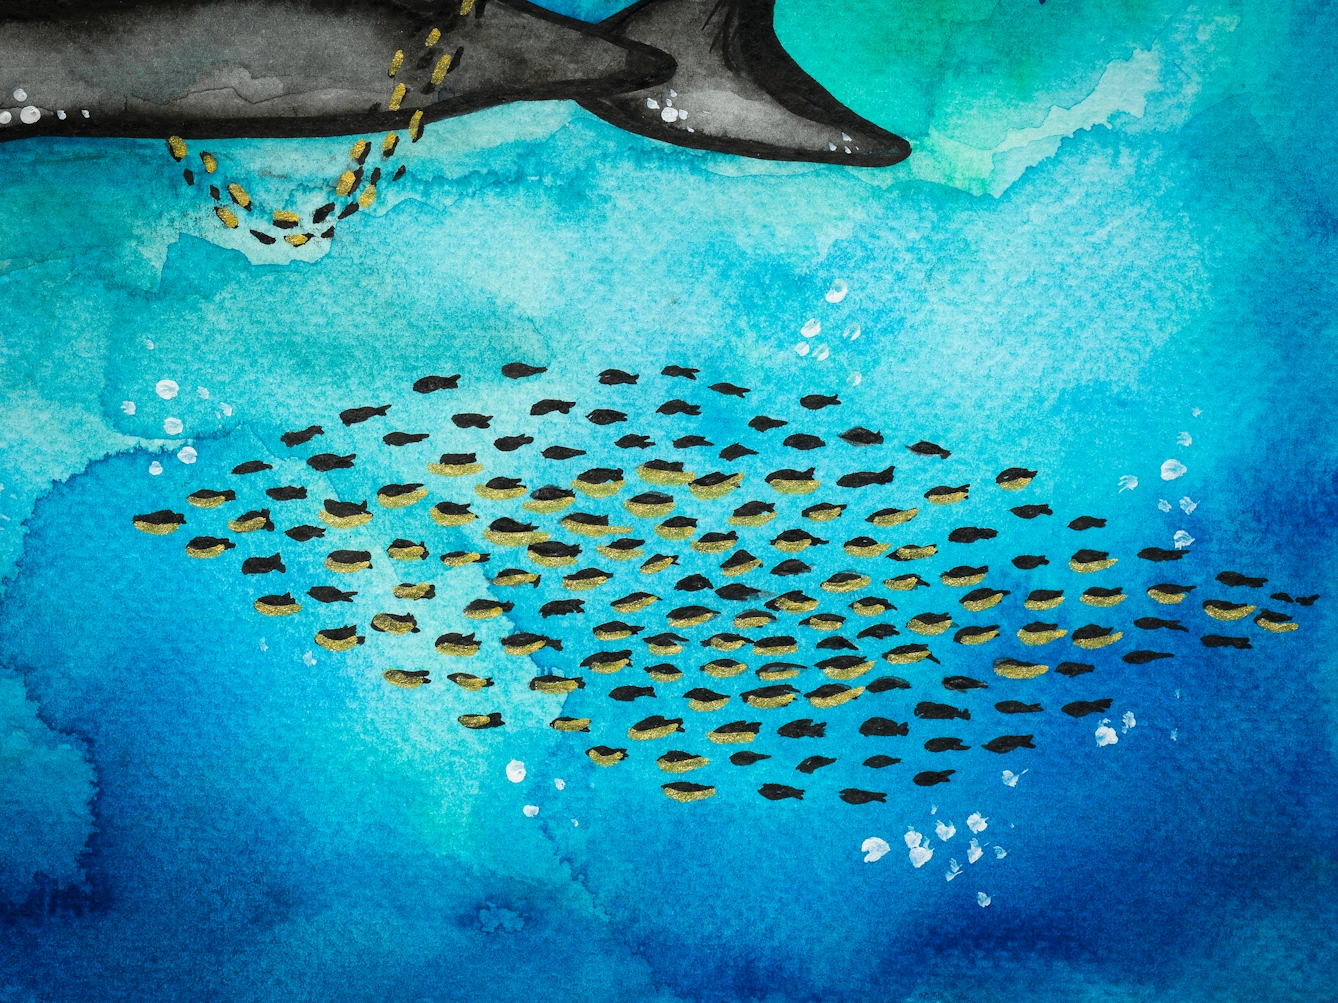 Detail from a larger colourful watercolour artwork. The artwork shows an underwater scene. A shoal of small fish are swimming in the middle of the scene. Above the fish is a whale's tail, with several small fish swimming around it. 